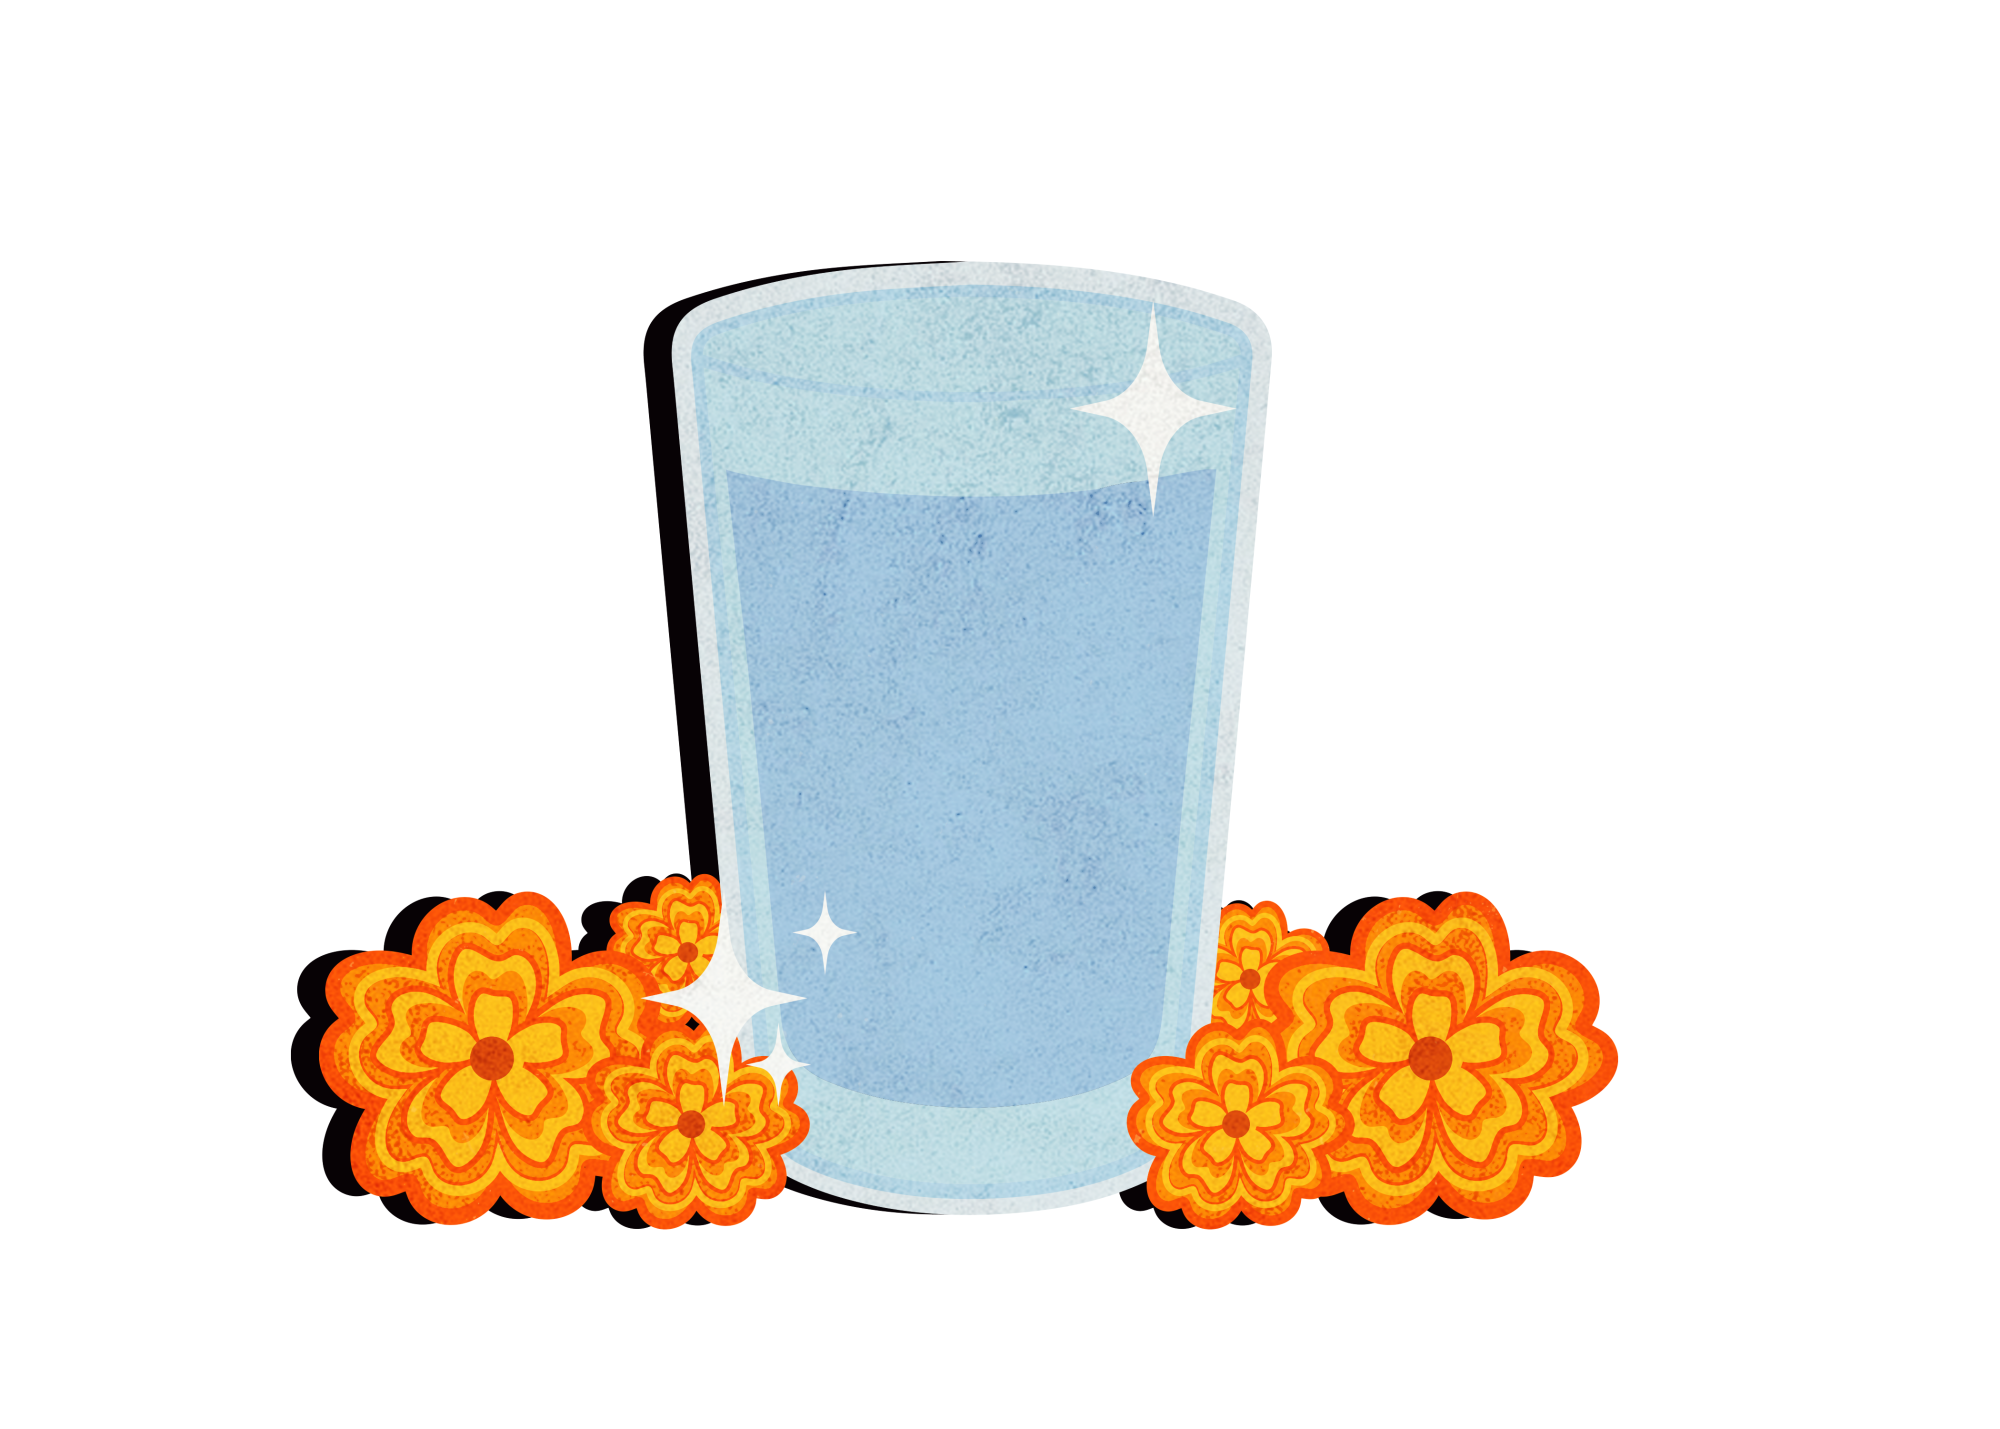 A drawing of a glass of water among orange flowers.